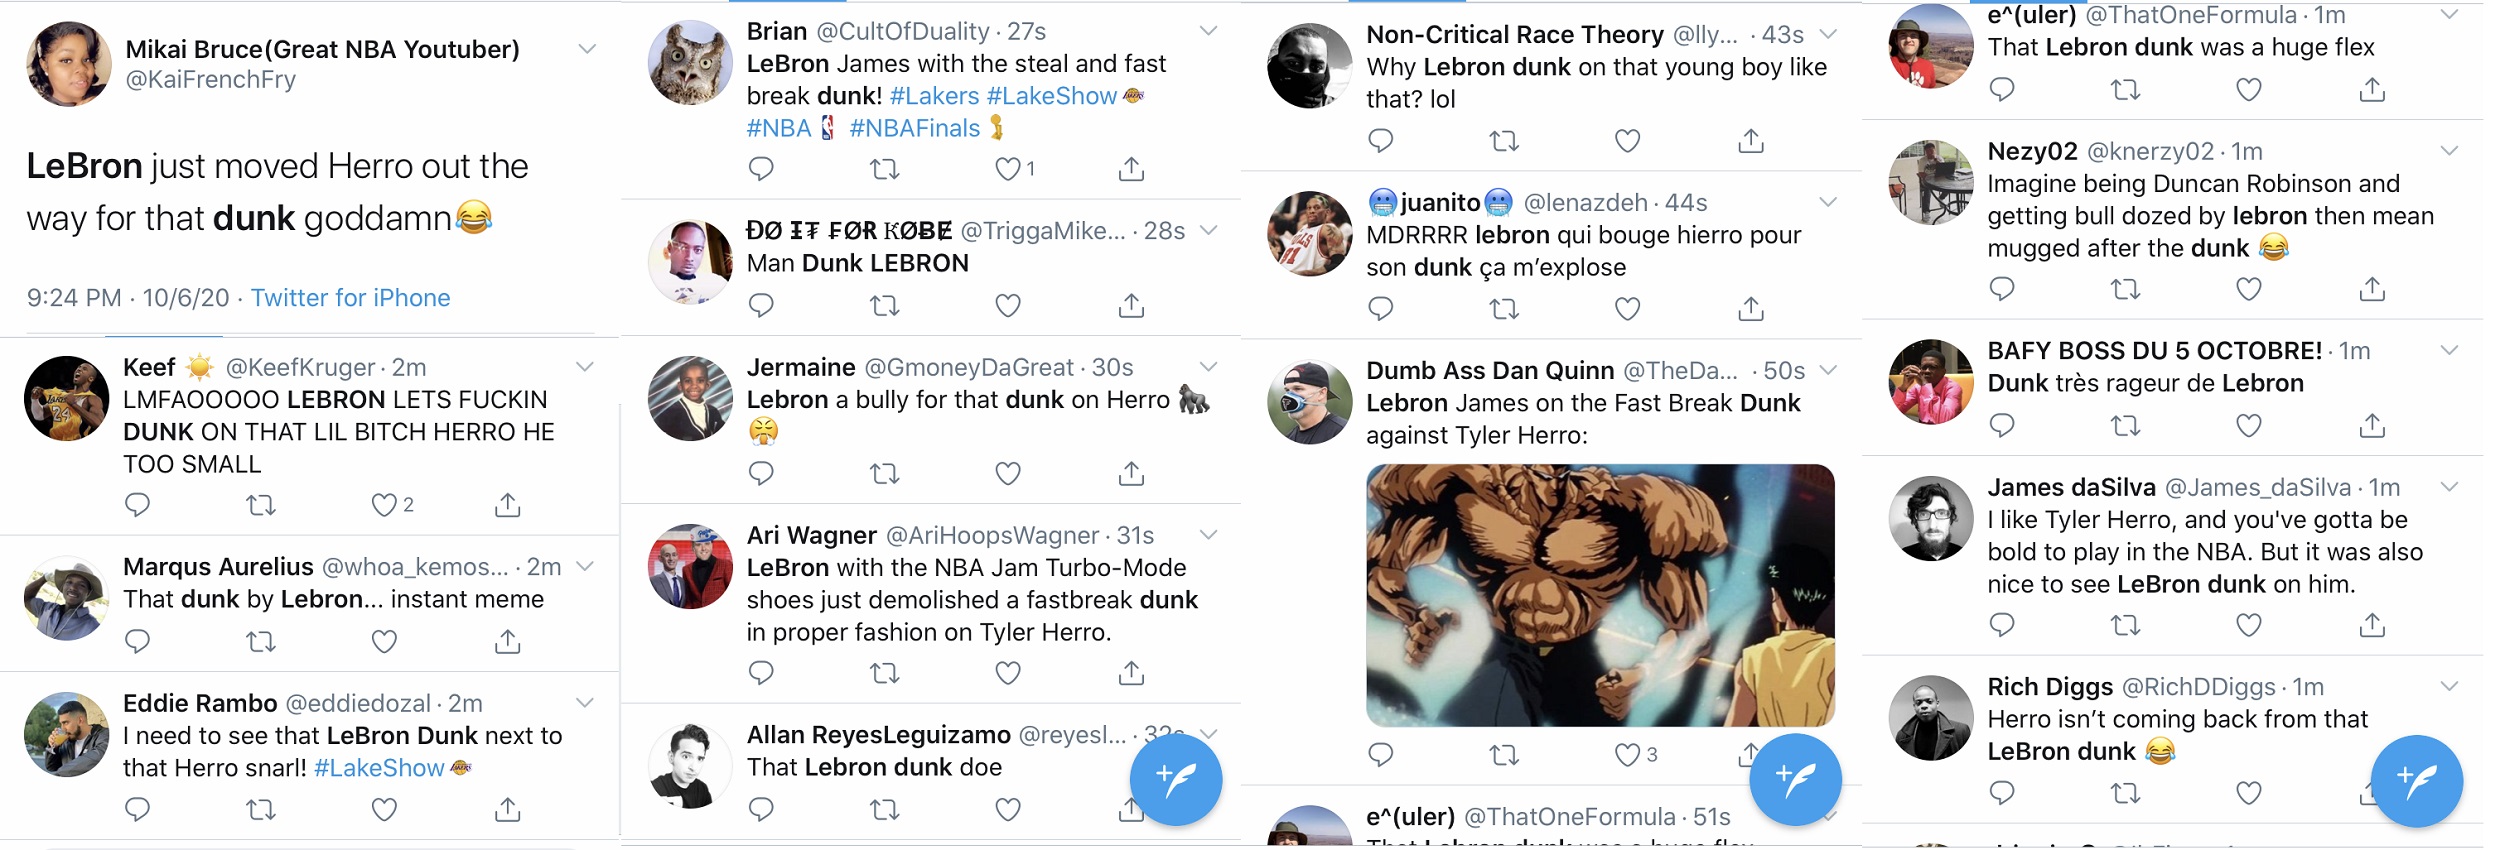 LeBron James gave the Lakers a boost, in Game 4 of the NBA Finals. A close game, LeBron got an easy steal, and went for the easy dunk. Tyler Herro, who has received tons of press, for his snarl, after Game 3, tried to defend the dunk, only for LeBron to put him on a poster, and Twitter now has jokes.